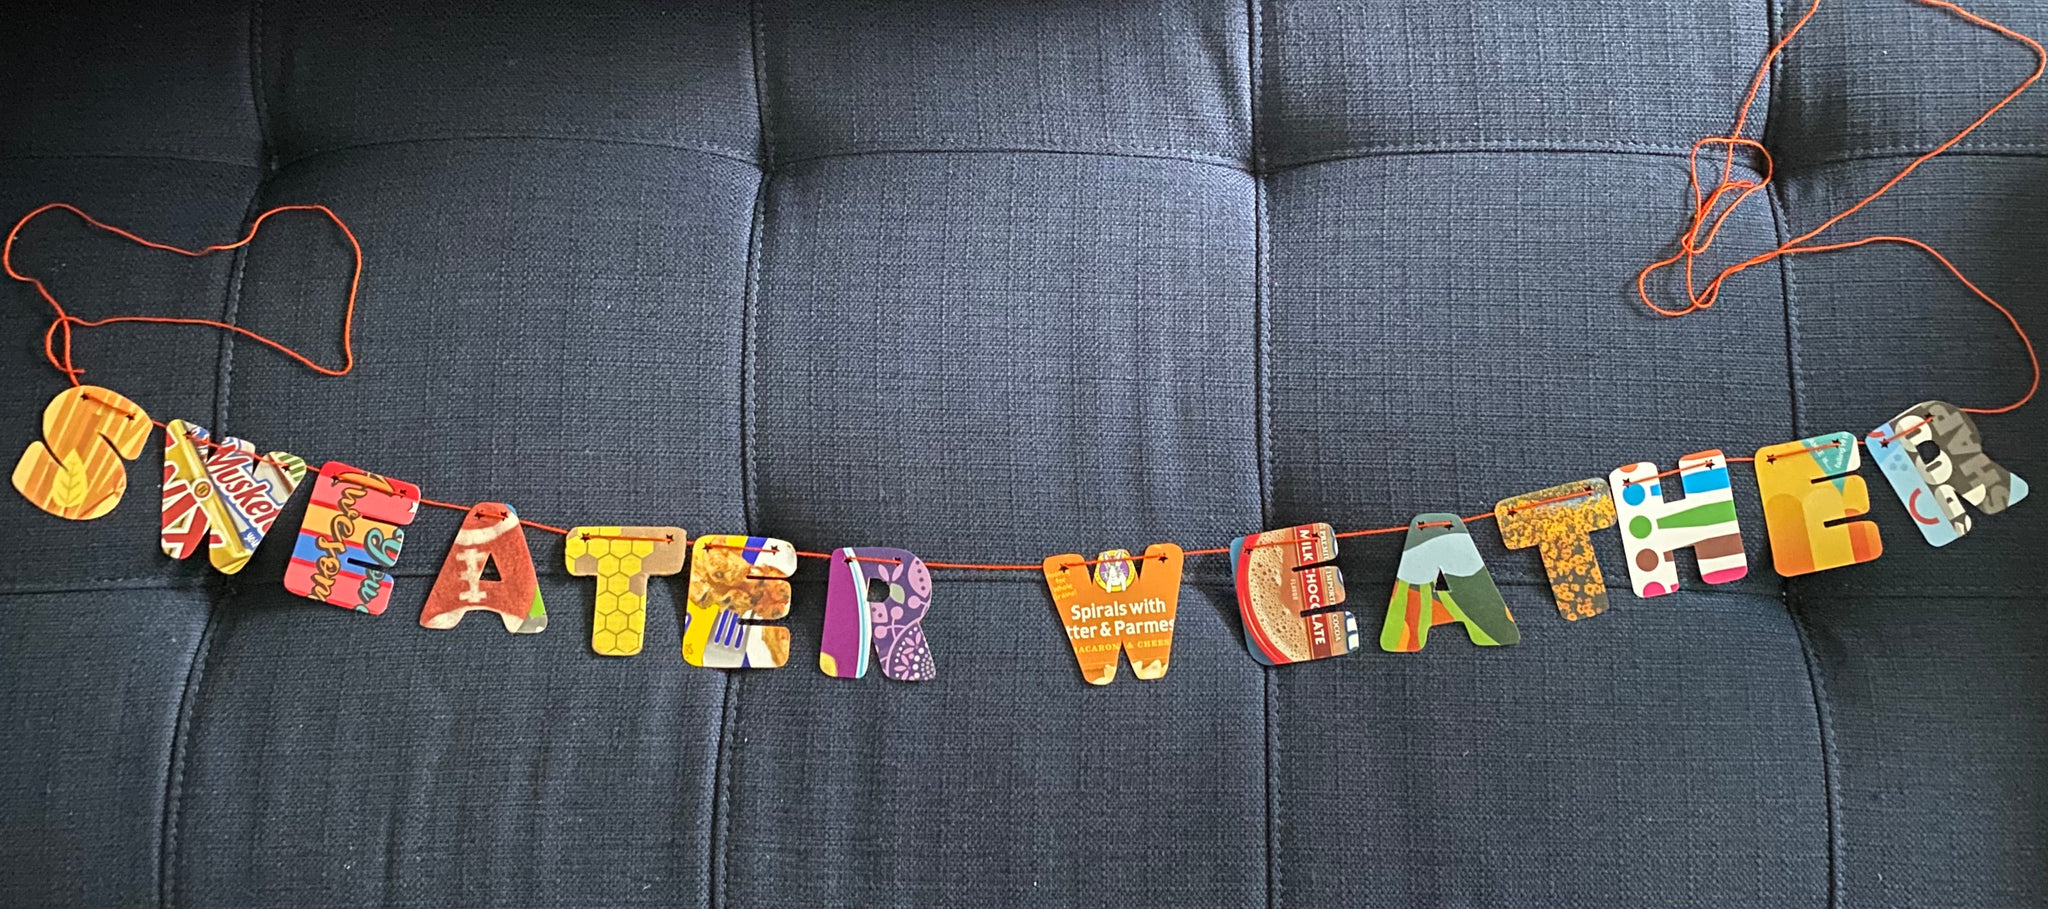 Sweater weather banner